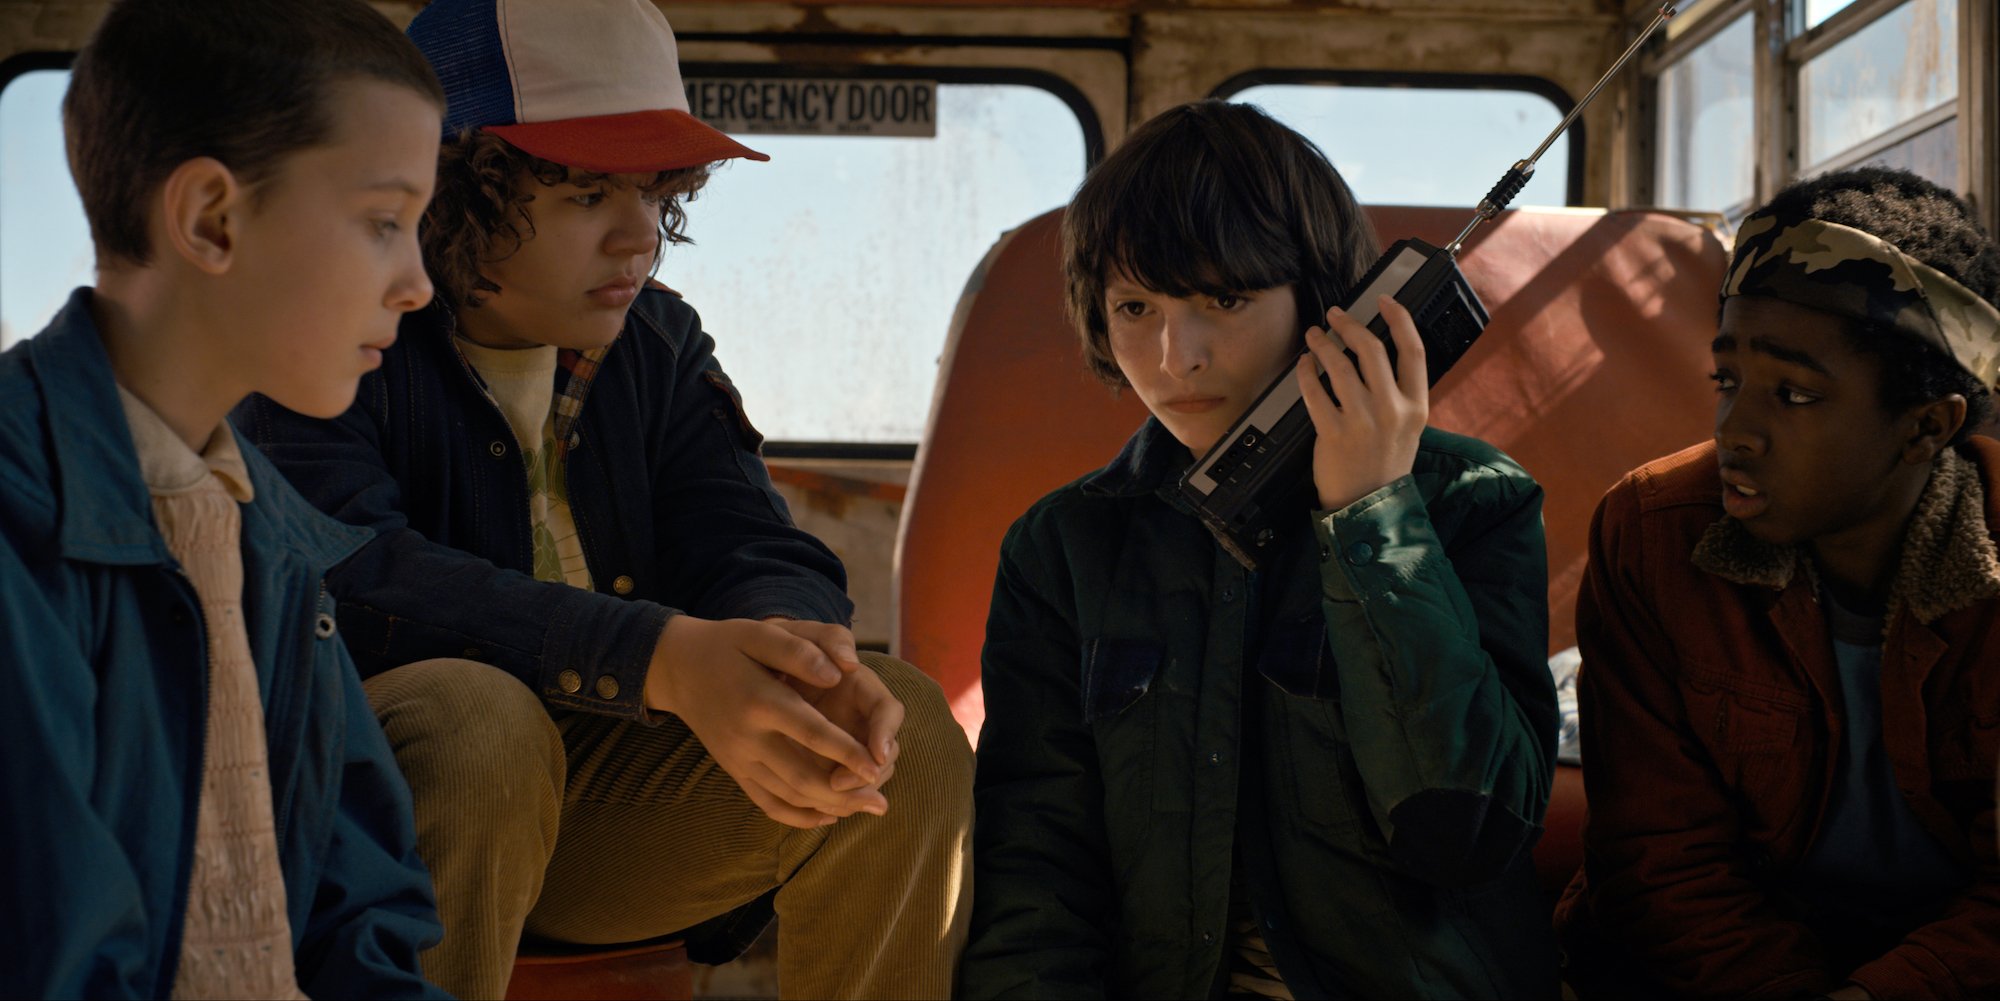 'Stranger Things' Season 1 recap includes Millie Bobby Brown, Gaten Matarazzo, and Finn Wolfhard in this production still.